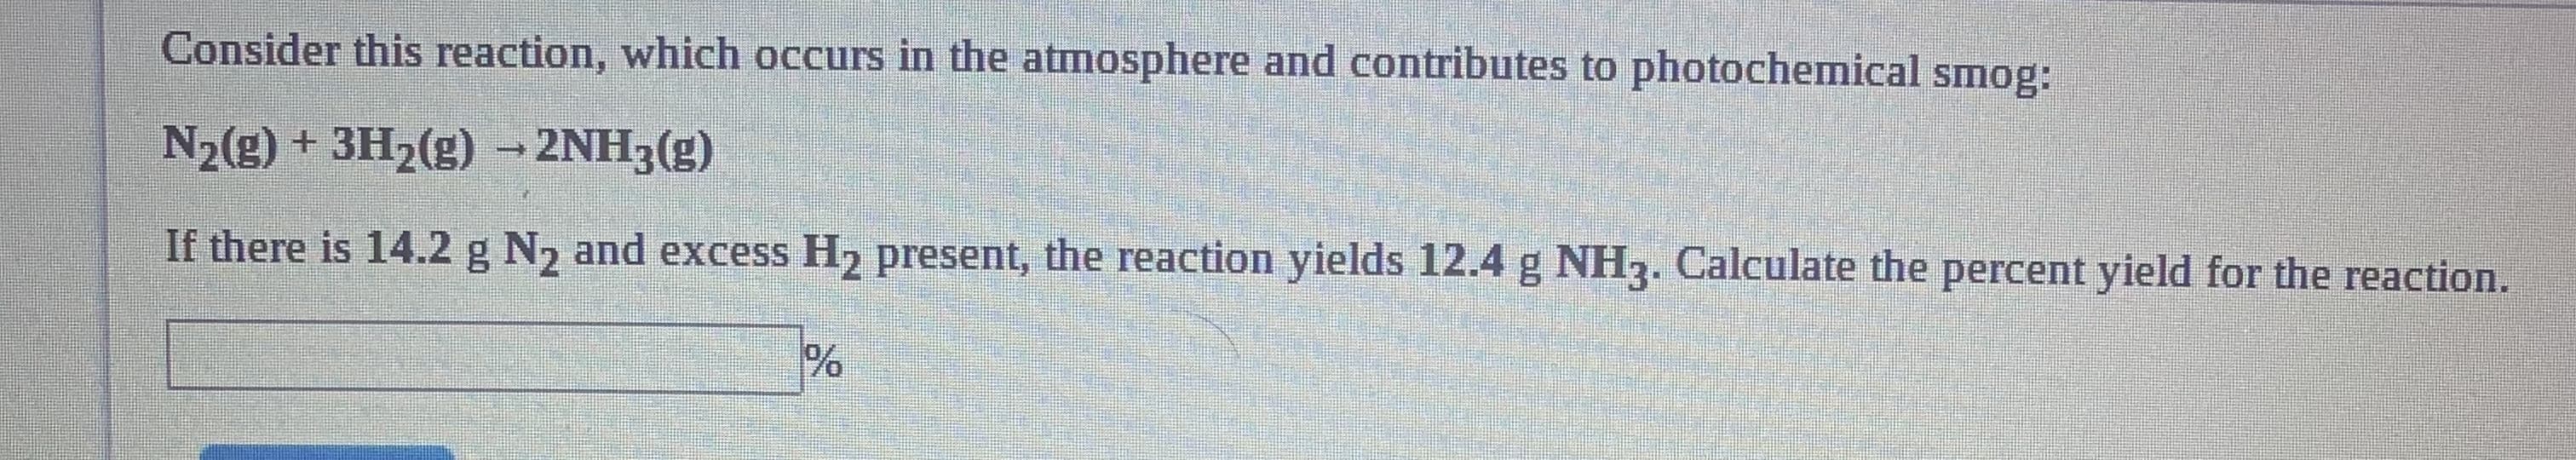 Consider this reaction, which occurs in the atmosphere and contributes to photochemical smog:
N2(g) + 3H2(g) → 2NH3(g)
If there is 14.2 g N2 and excess H2 present, the reaction yields 12.4 g NH3. Calculate the percent yield for the reaction.
